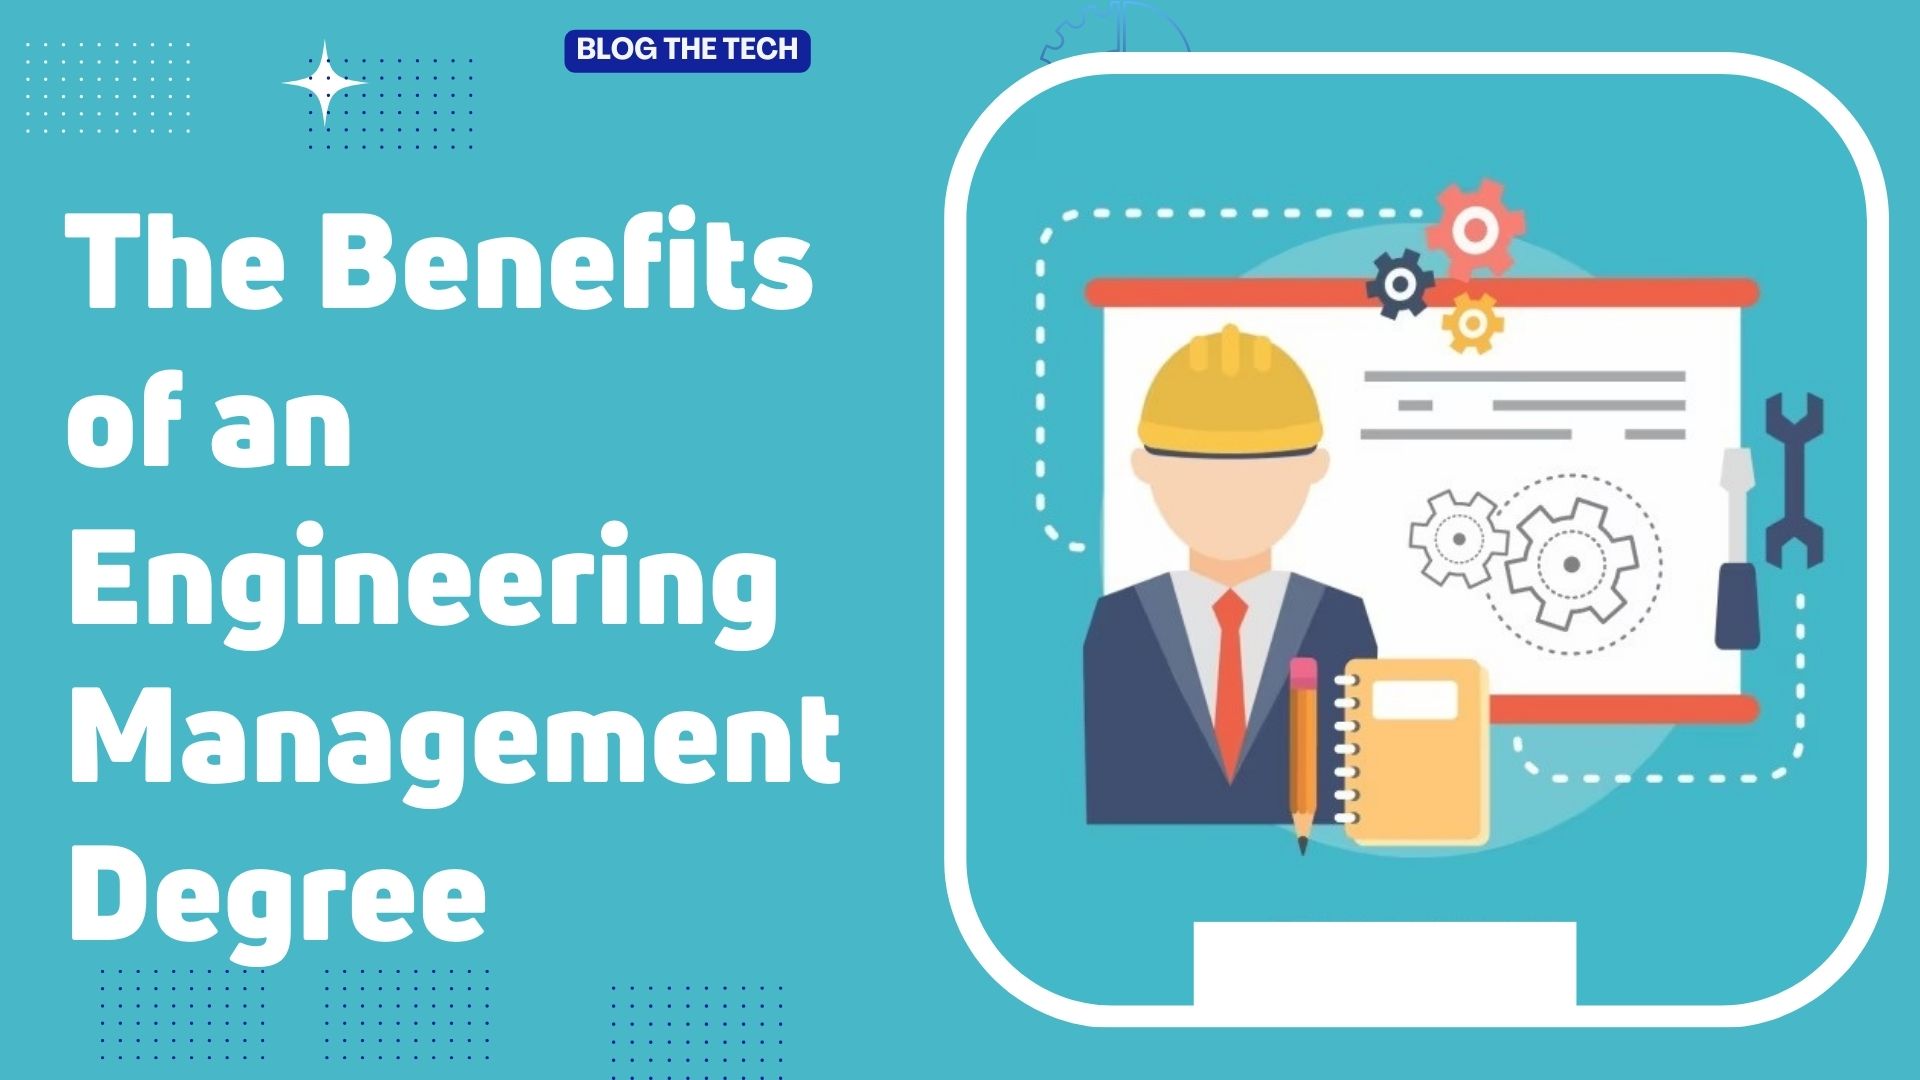 The Benefits of an Engineering Management Degree